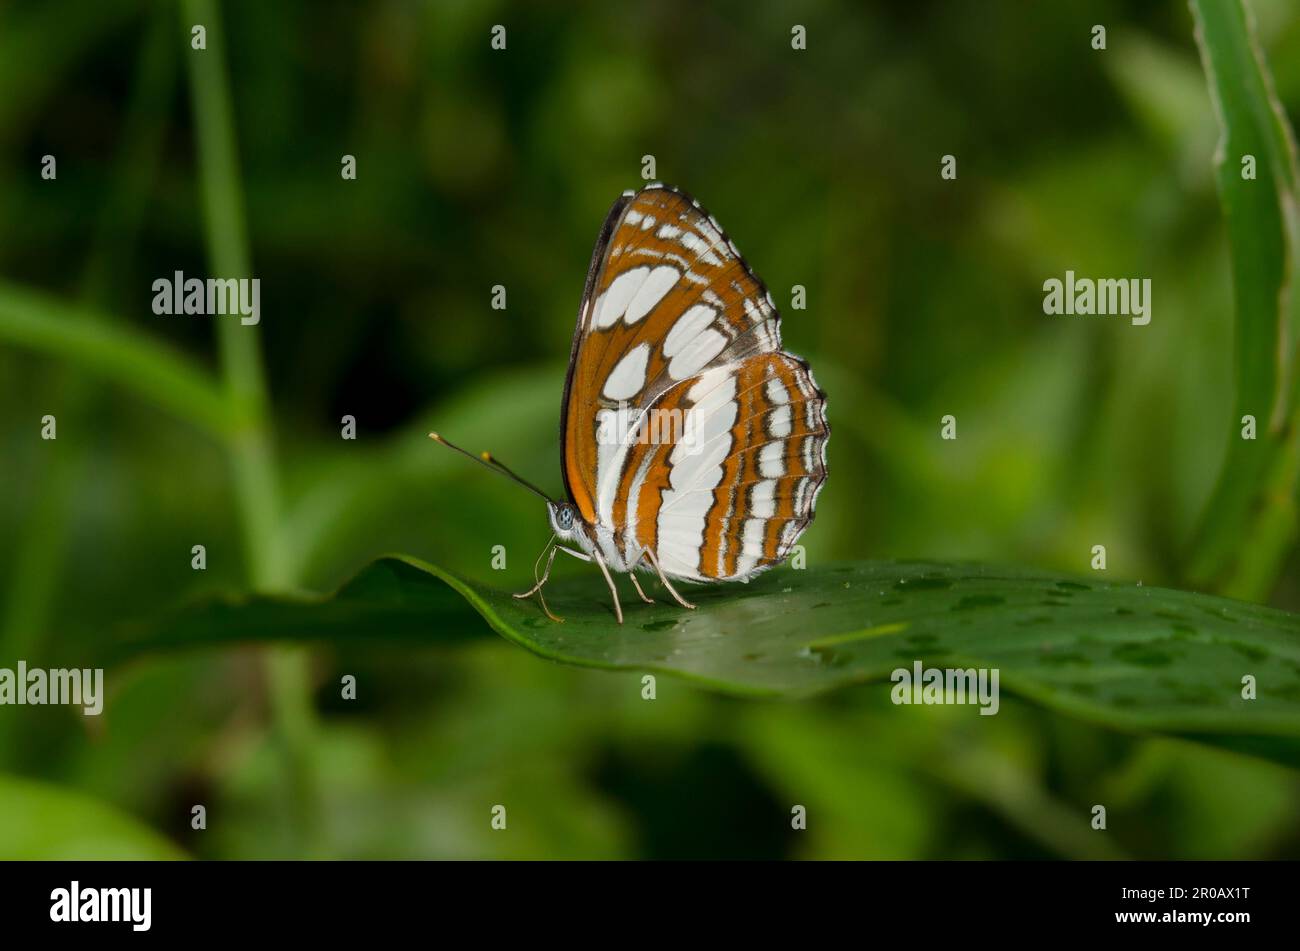 Sergeant Butterfly, Athyma sp, on leaf, Klungkung, Bali, Indonesia Stock Photo